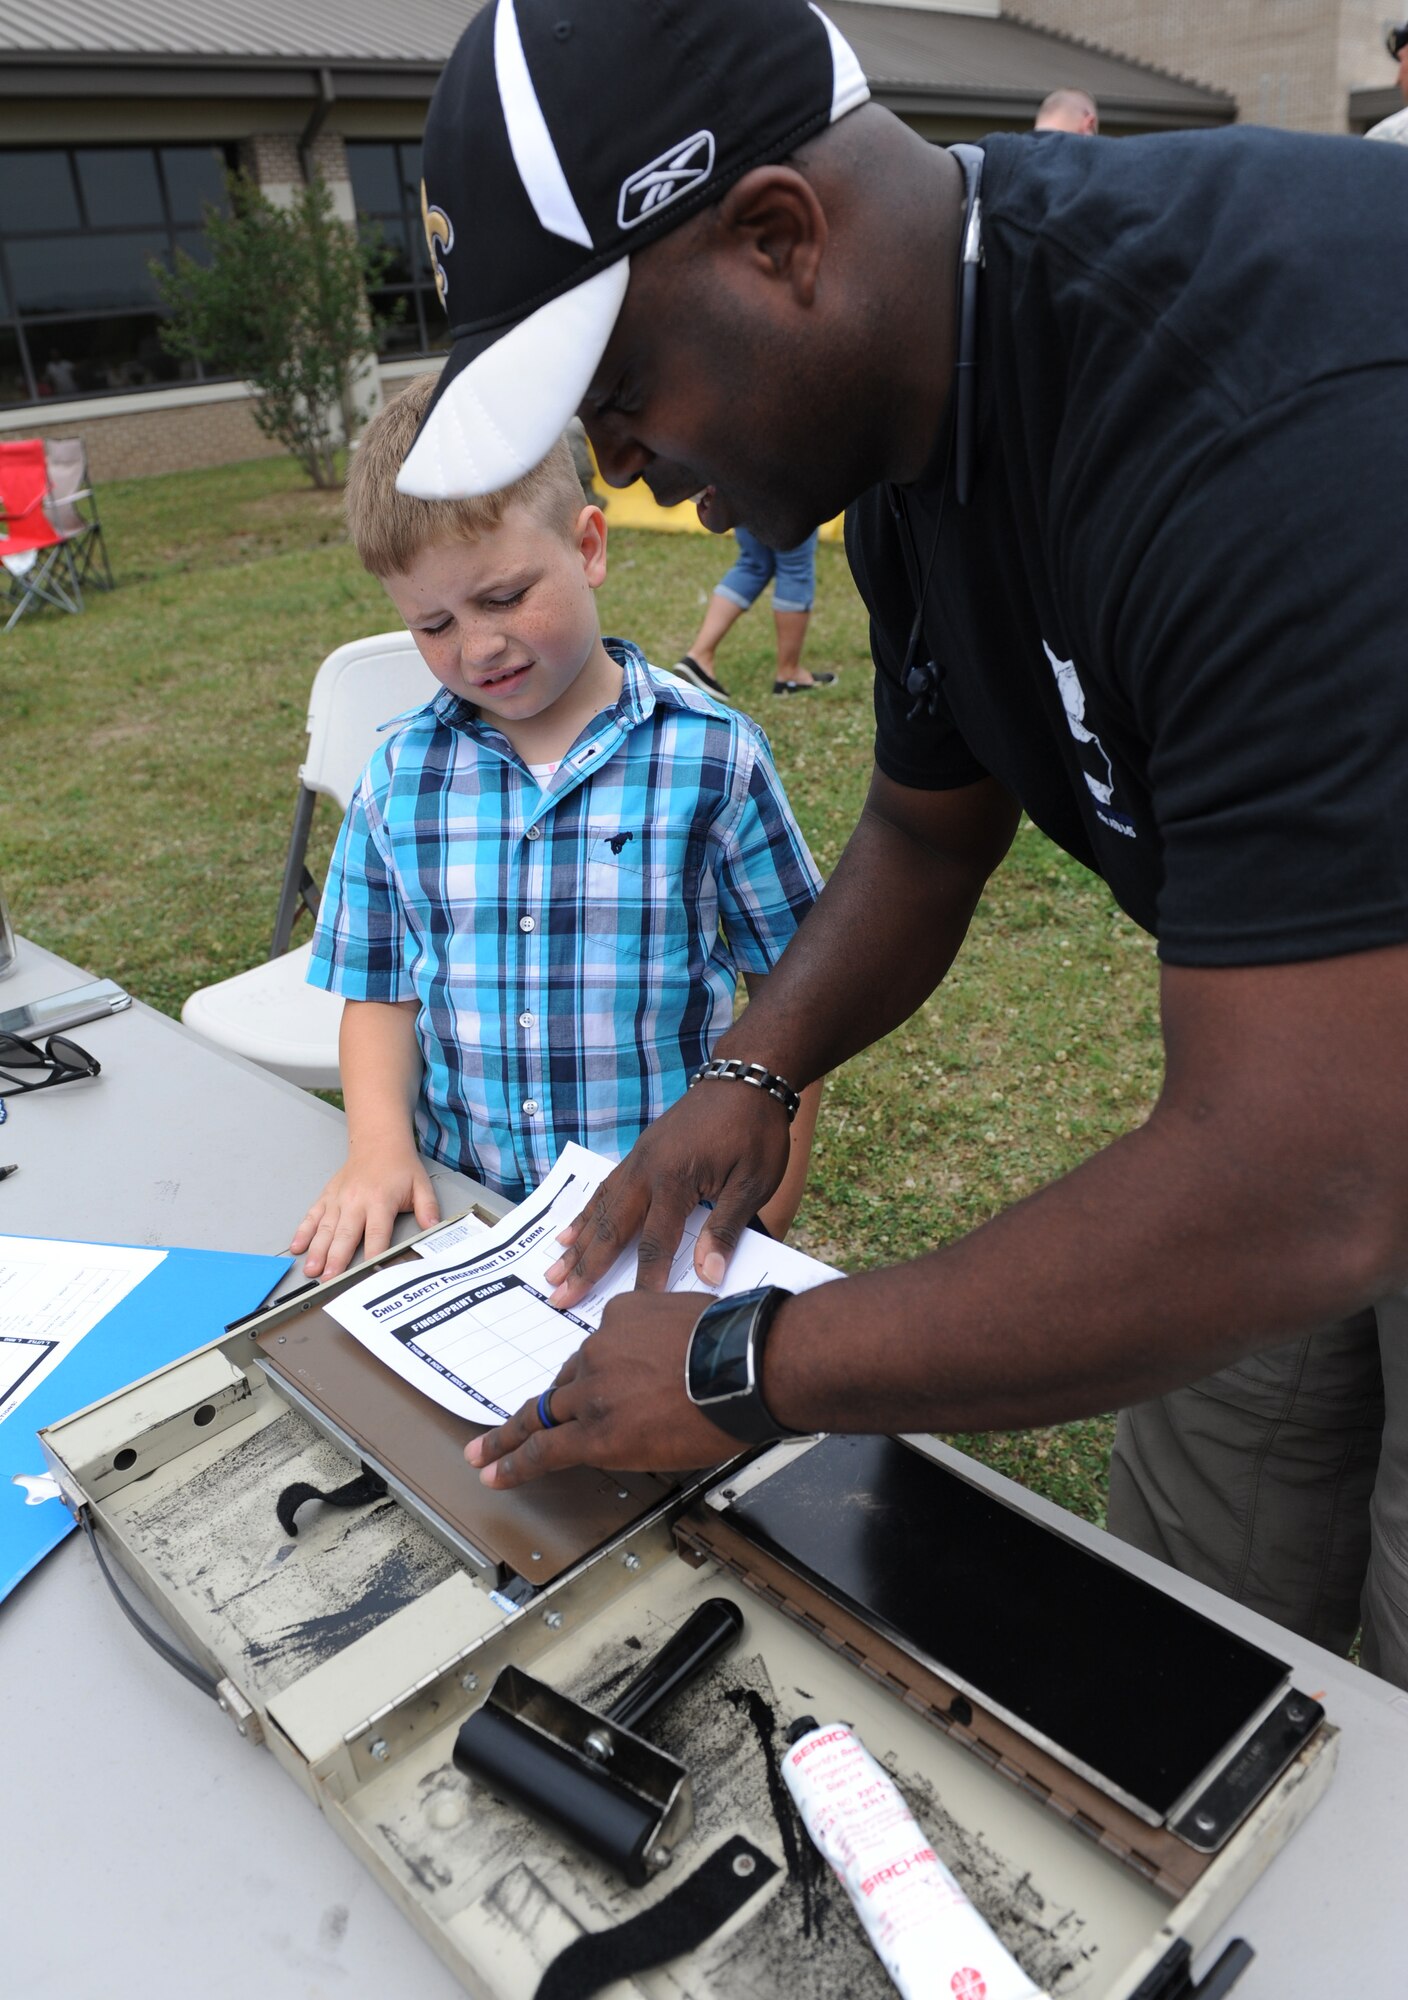 Eric Dalsin II, son of Marcy Dalsin, has his finger prints taken by Tech. Sgt. Jason Gavin, 81st Security Forces Squadron investigator, during the 81st SFS Fun Day at the base exchange May 16, 2016, Keesler Air Force Base, Miss. The event was held during National Police Week, which recognizes the service of law enforcement men and women who put their lives at risk every day. (U.S. Air Force photo by Kemberly Groue)